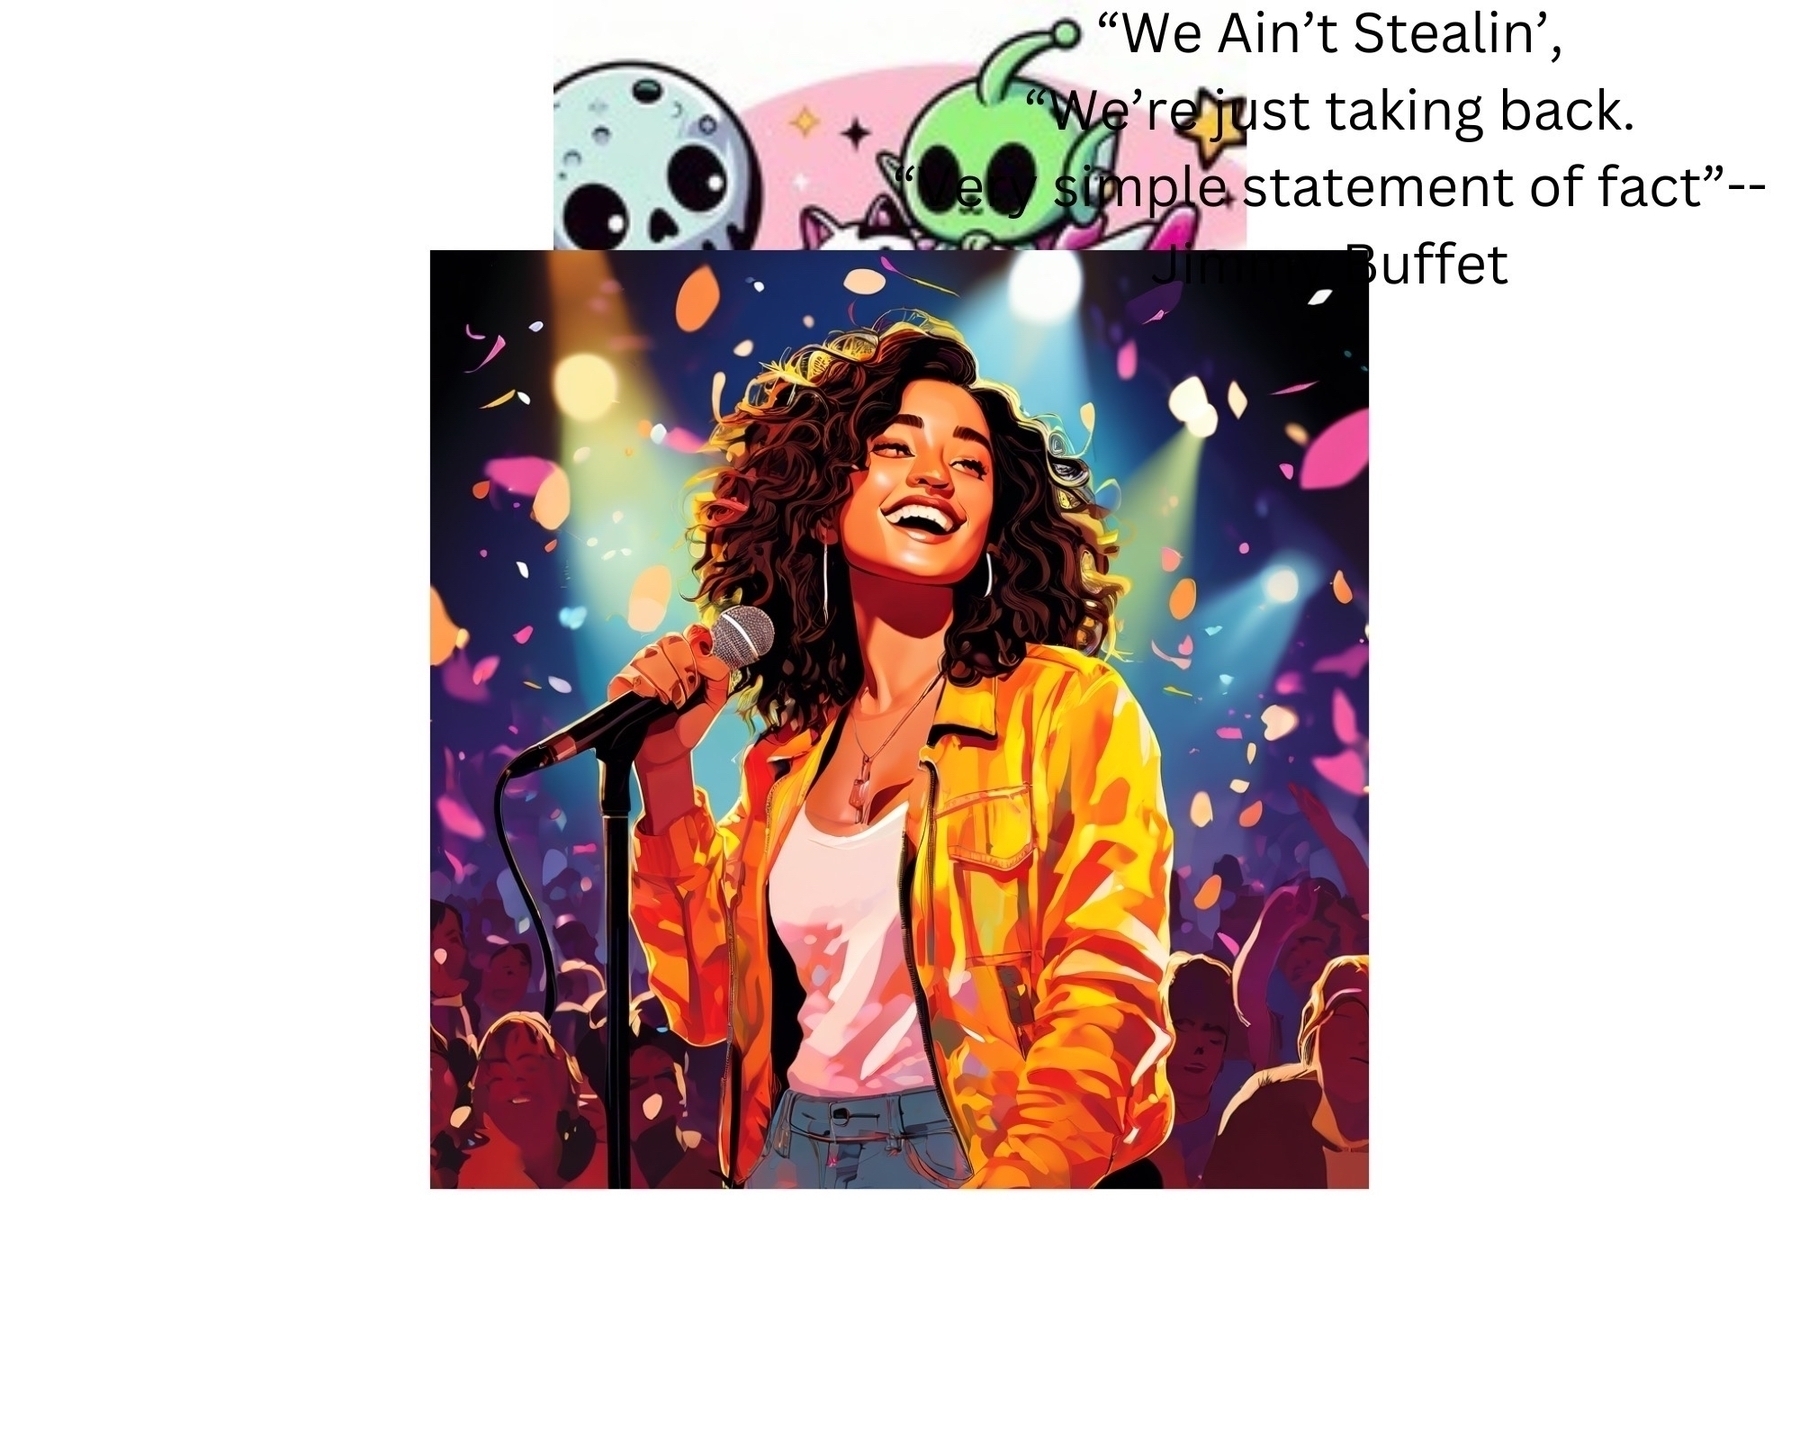 The image is a composite of two distinct parts. &10;&10;The top part features a cartoonish illustration of two green aliens with large black eyes. They are set against a pink background with stars. Above them, there is text that reads: "We Ain't Stealin', We're just taking back. Simple statement of fact" -- Jimmy Buffet.&10;&10;The bottom part is a vibrant, colorful illustration of a woman singing on stage. She has curly hair and is wearing a bright yellow jacket over a white top. She is holding a microphone and appears to be very happy, with a big smile on her face. The background is filled with colorful lights and confetti, and there is a crowd of people behind her, suggesting a lively concert atmosphere.￼